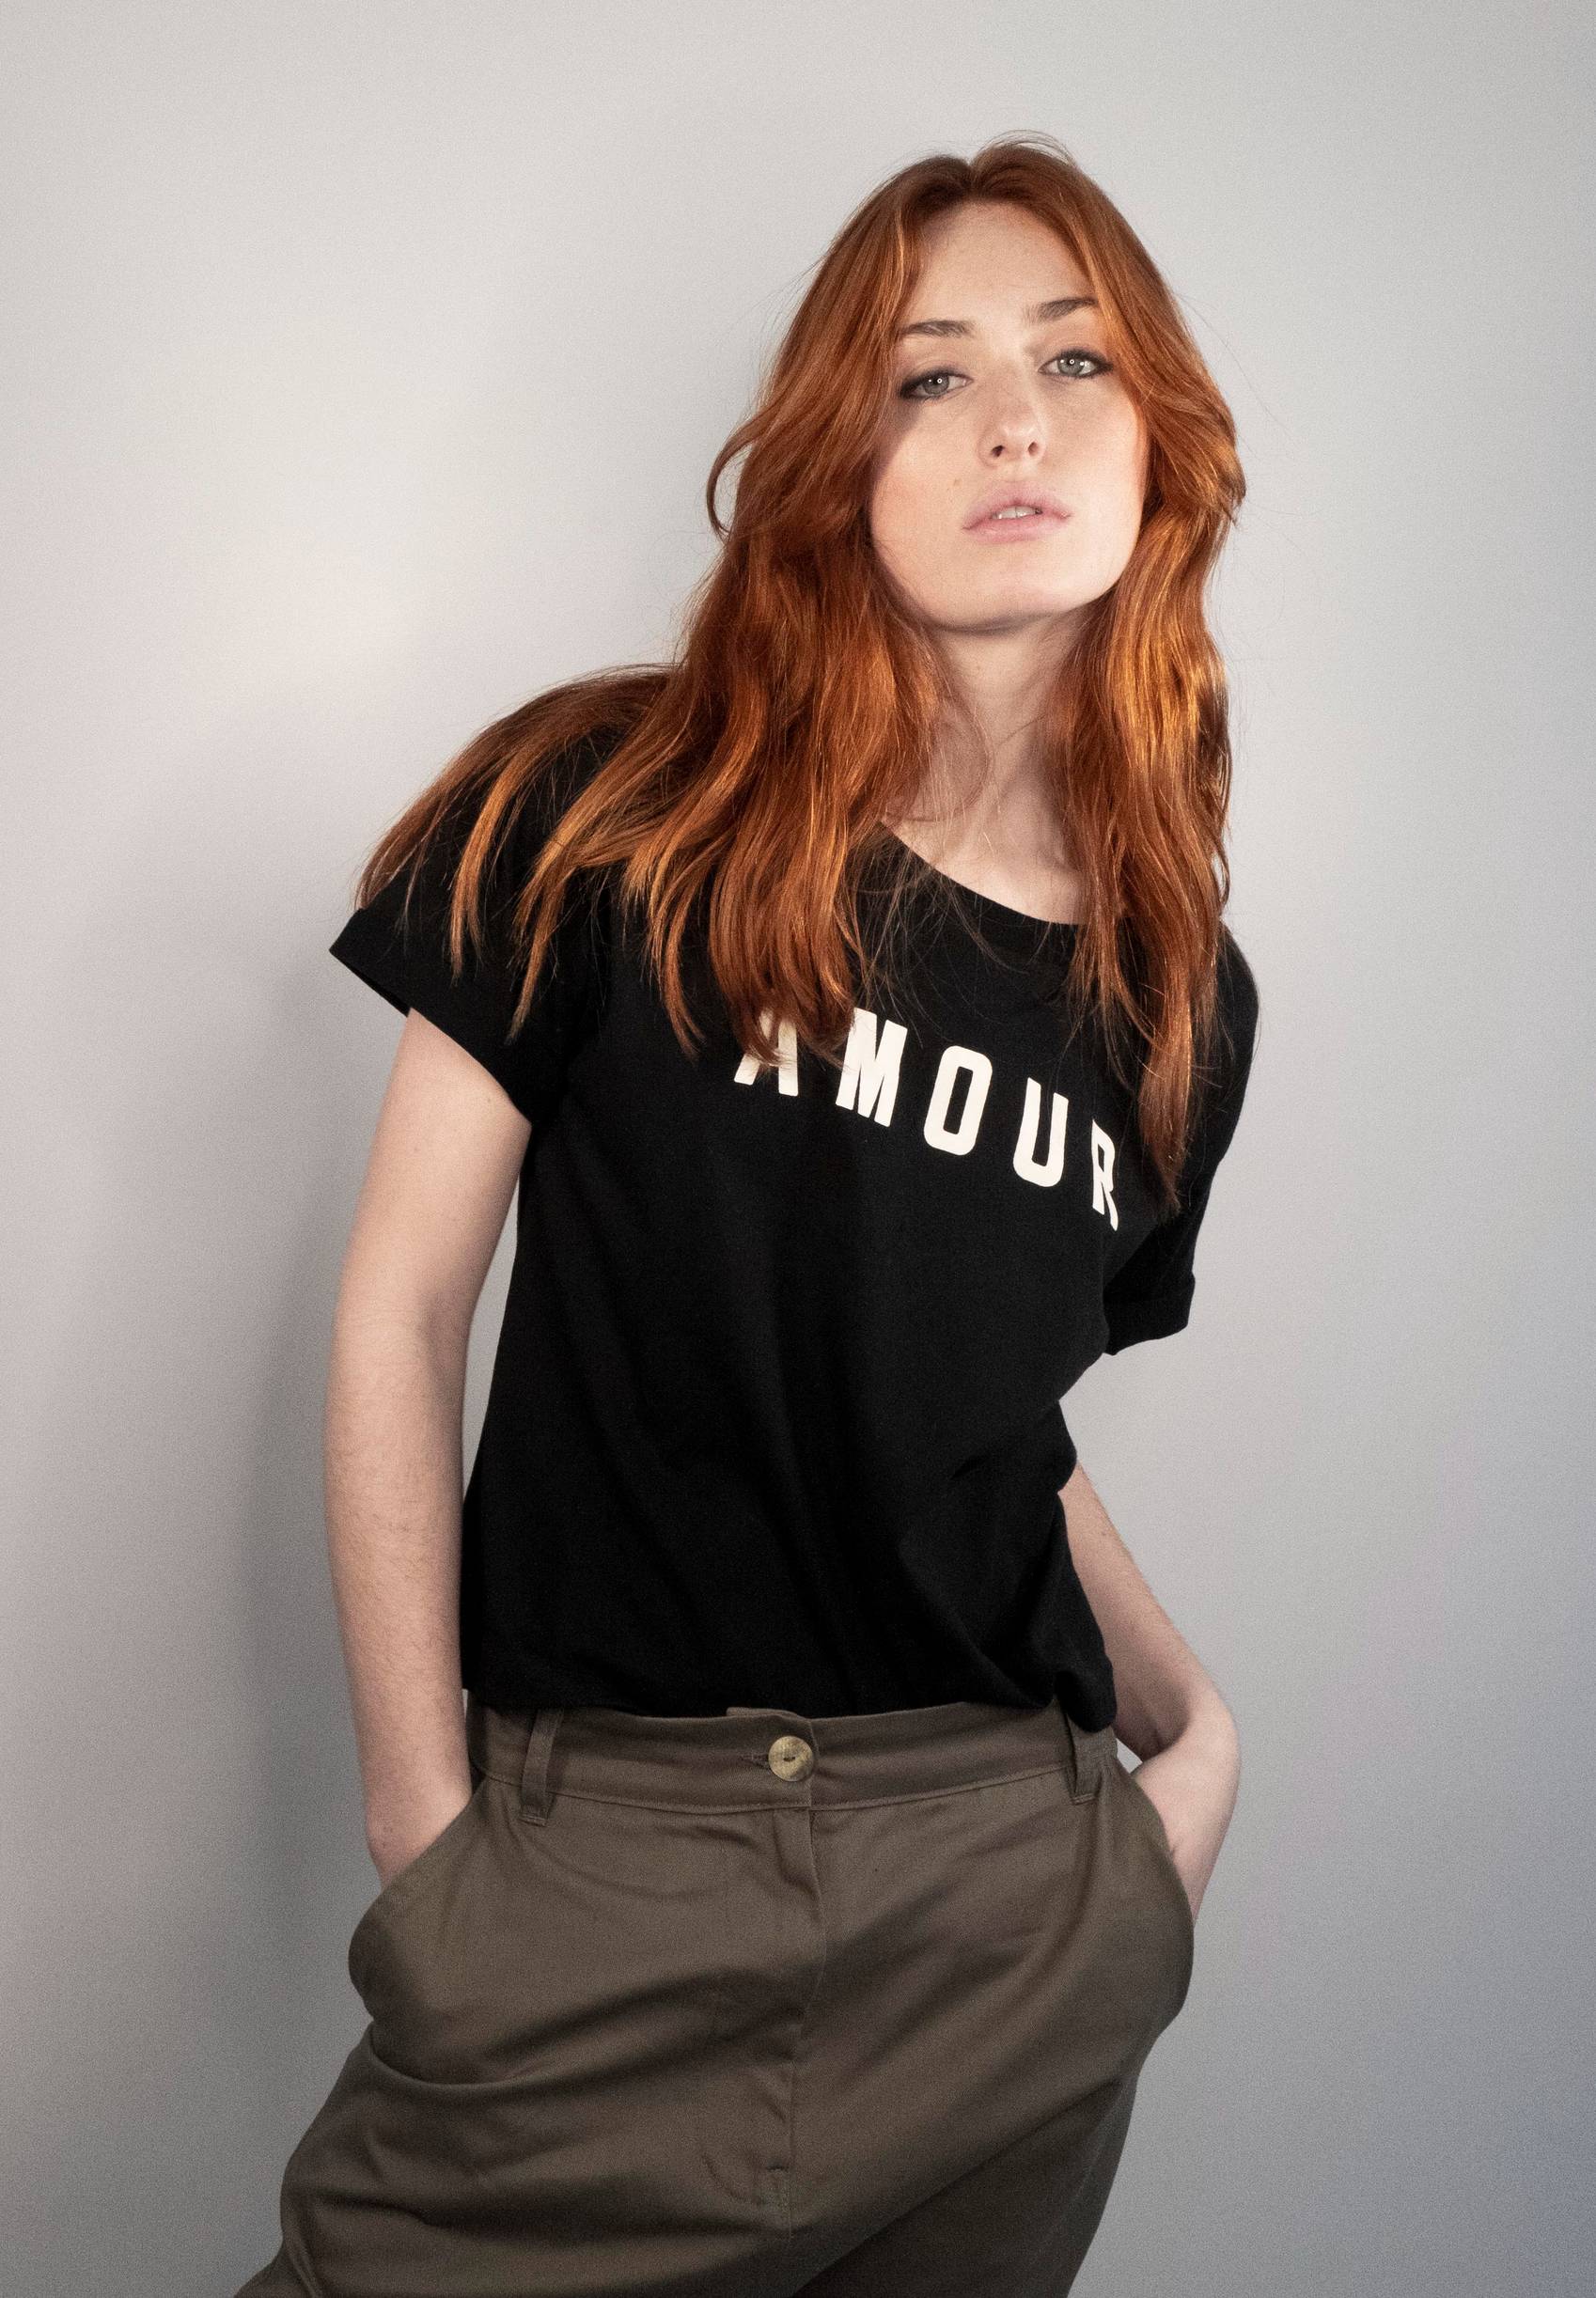 AMOUR T-shirt by Vintage Century